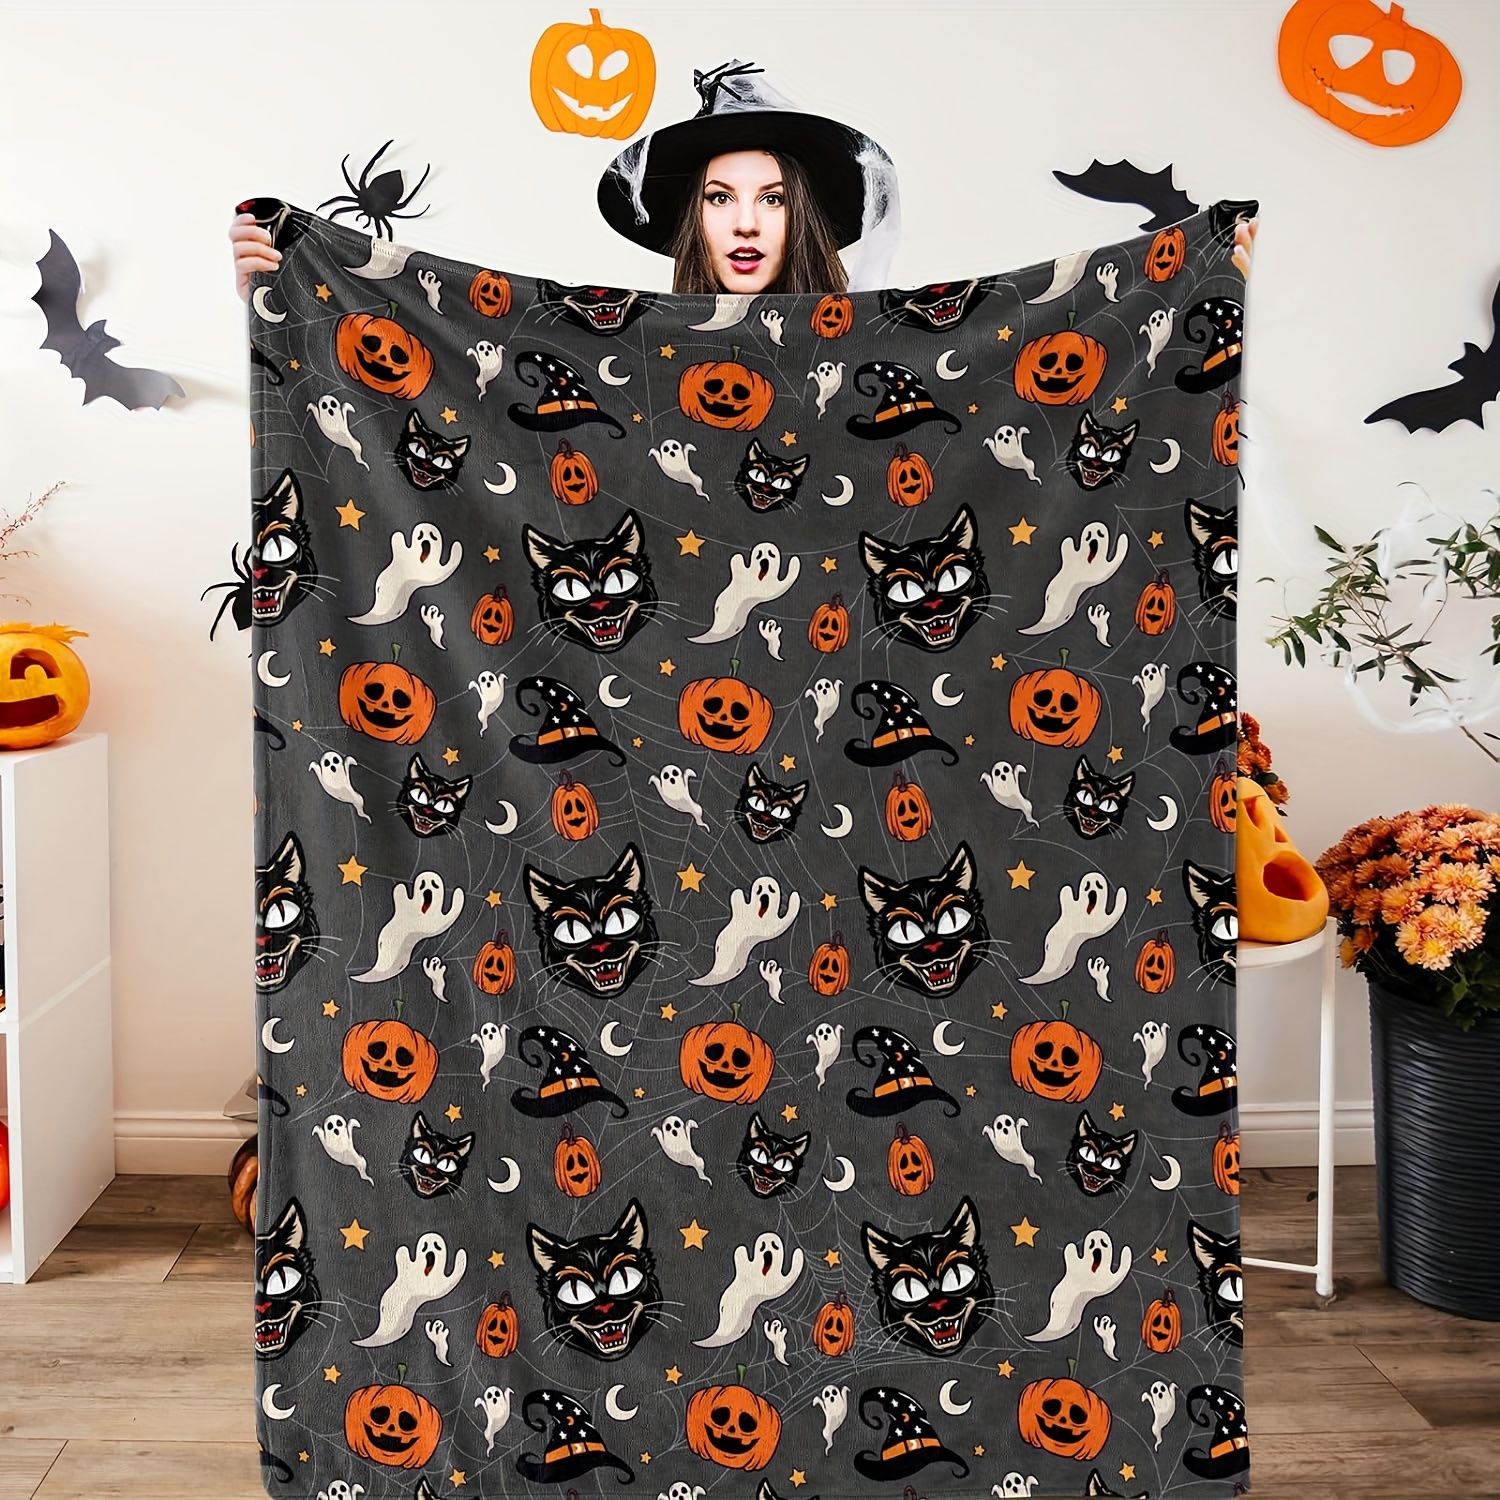 

Cozy Halloween Flannel Throw Blanket - Black Cat & Pumpkin Ghost Design, Soft Plush For Couch Or Bed, All-season Comfort